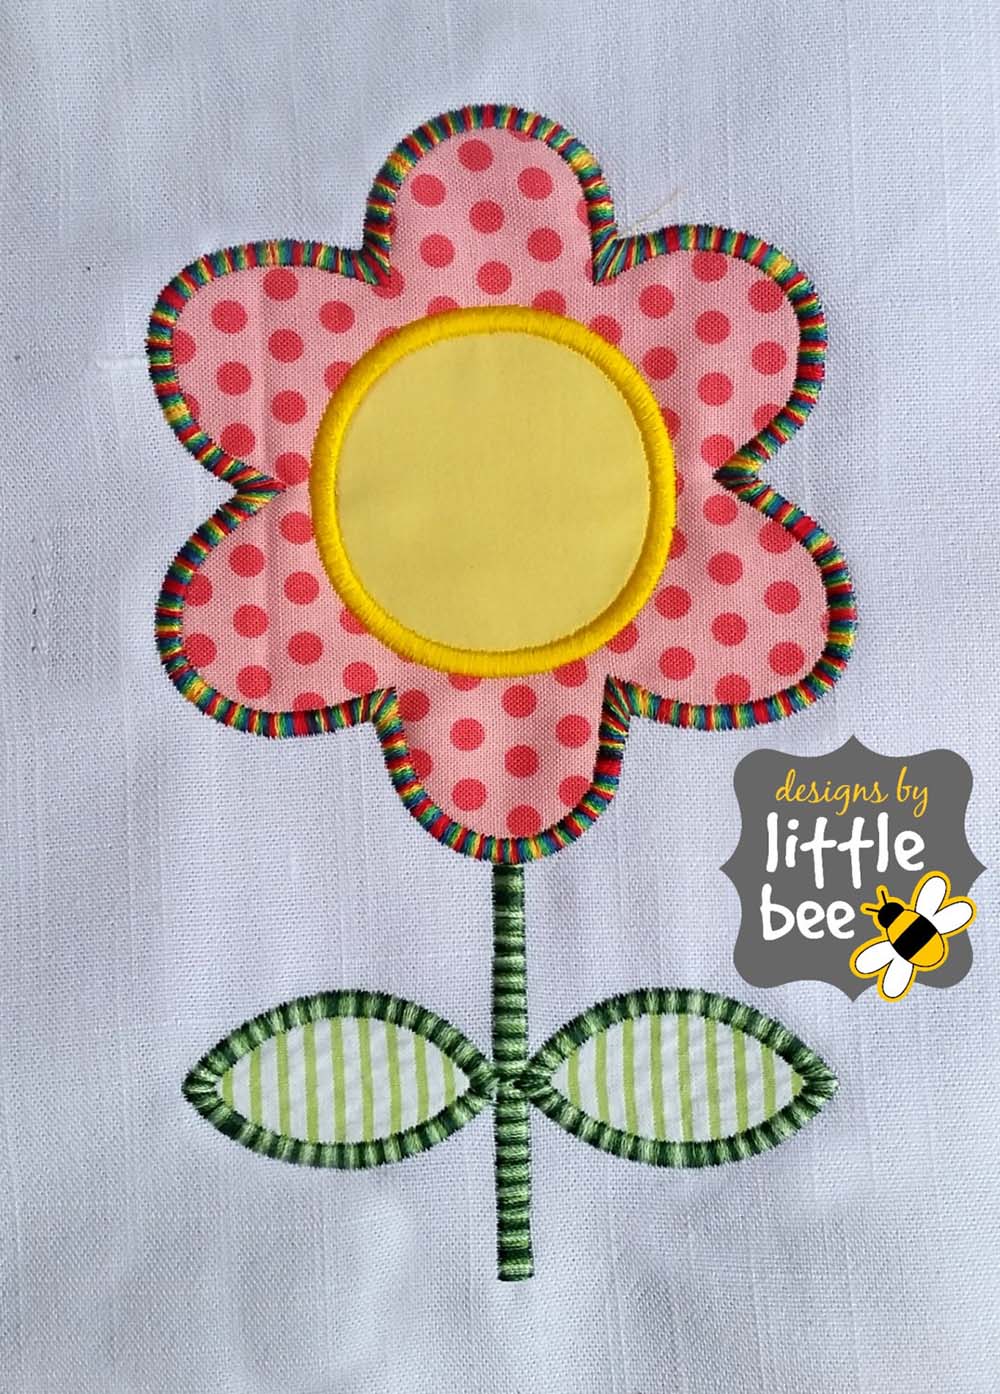 Simple Daisy Flower Applque - Designs by Little Bee